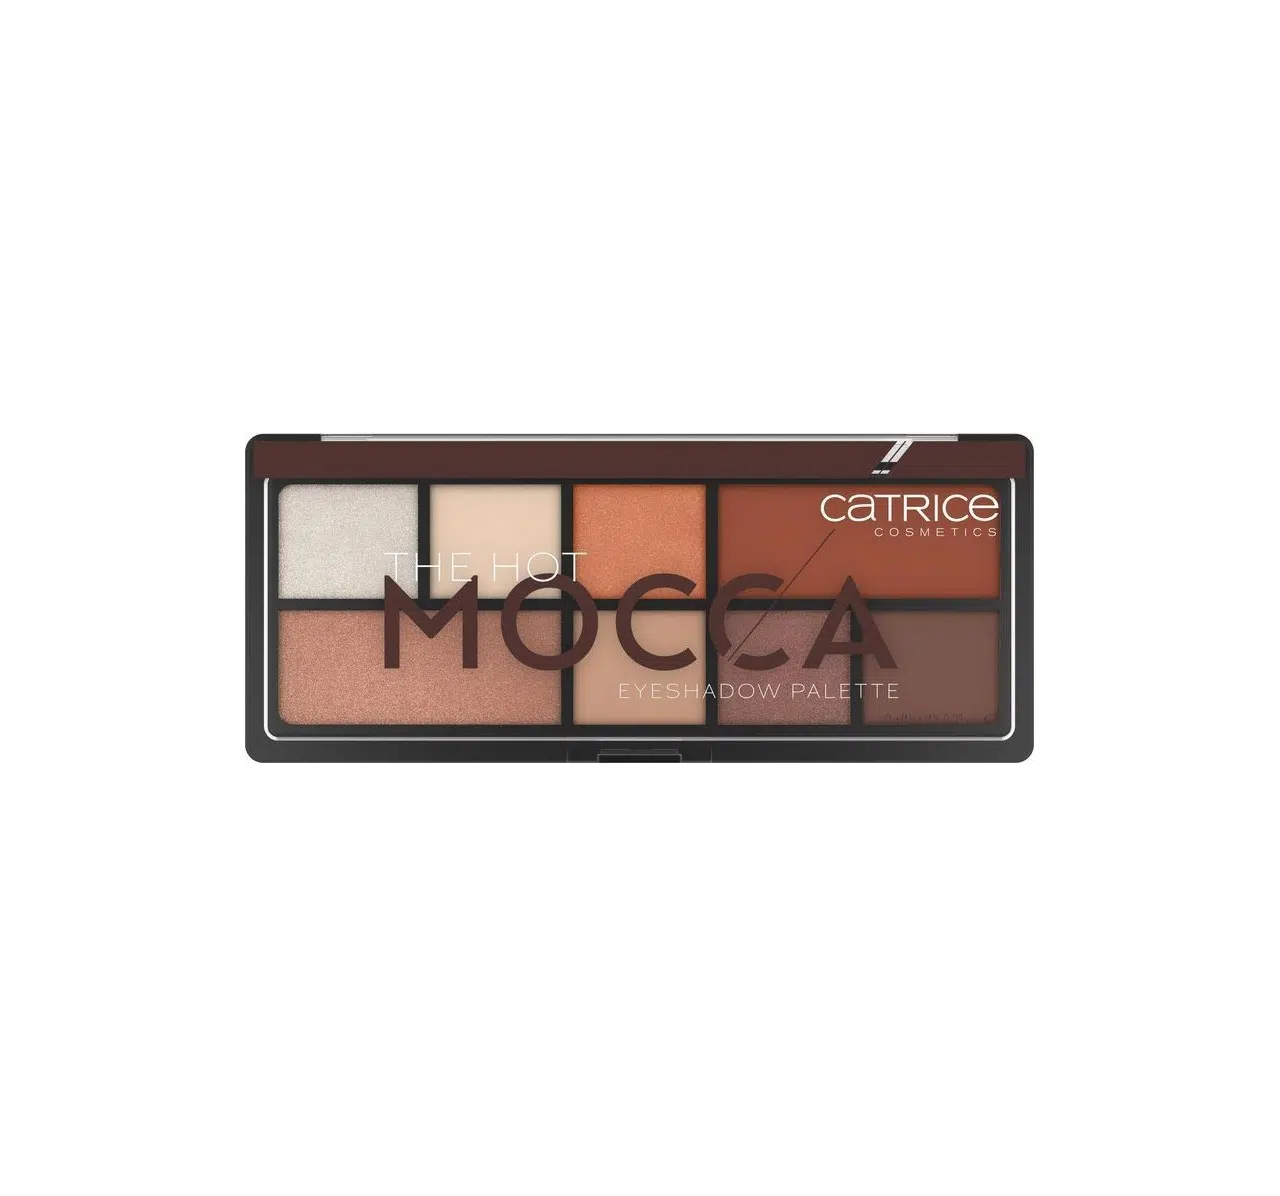 Catrice's The Hot Mocca eyeshadow